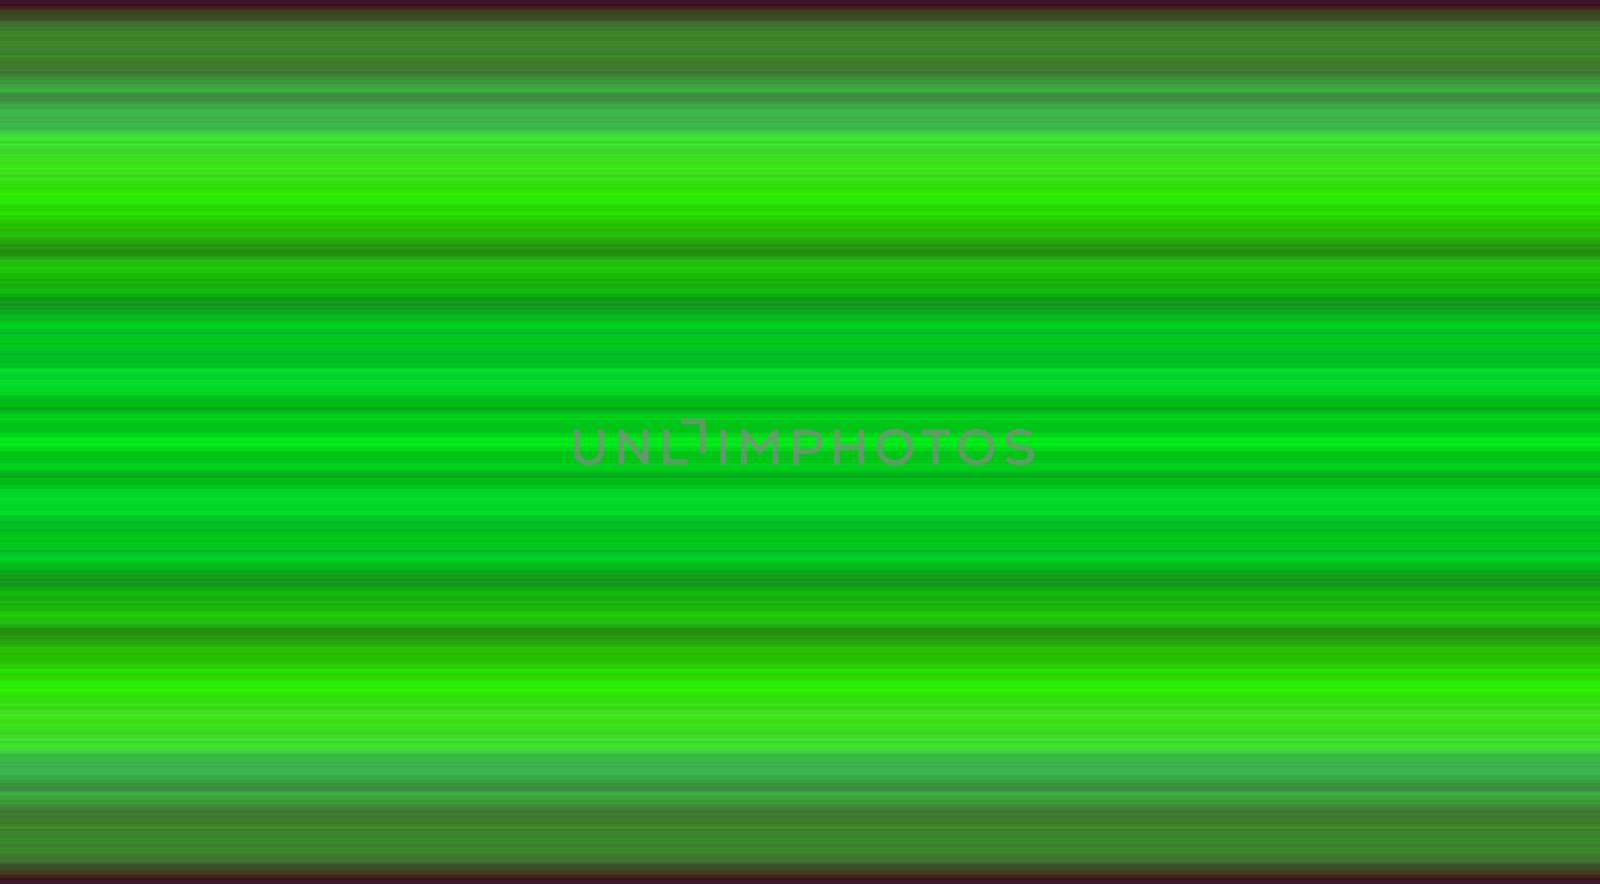 Expressive creative abstract linear digital illustrations. Digital abstract drawing of light green transverse straight lines